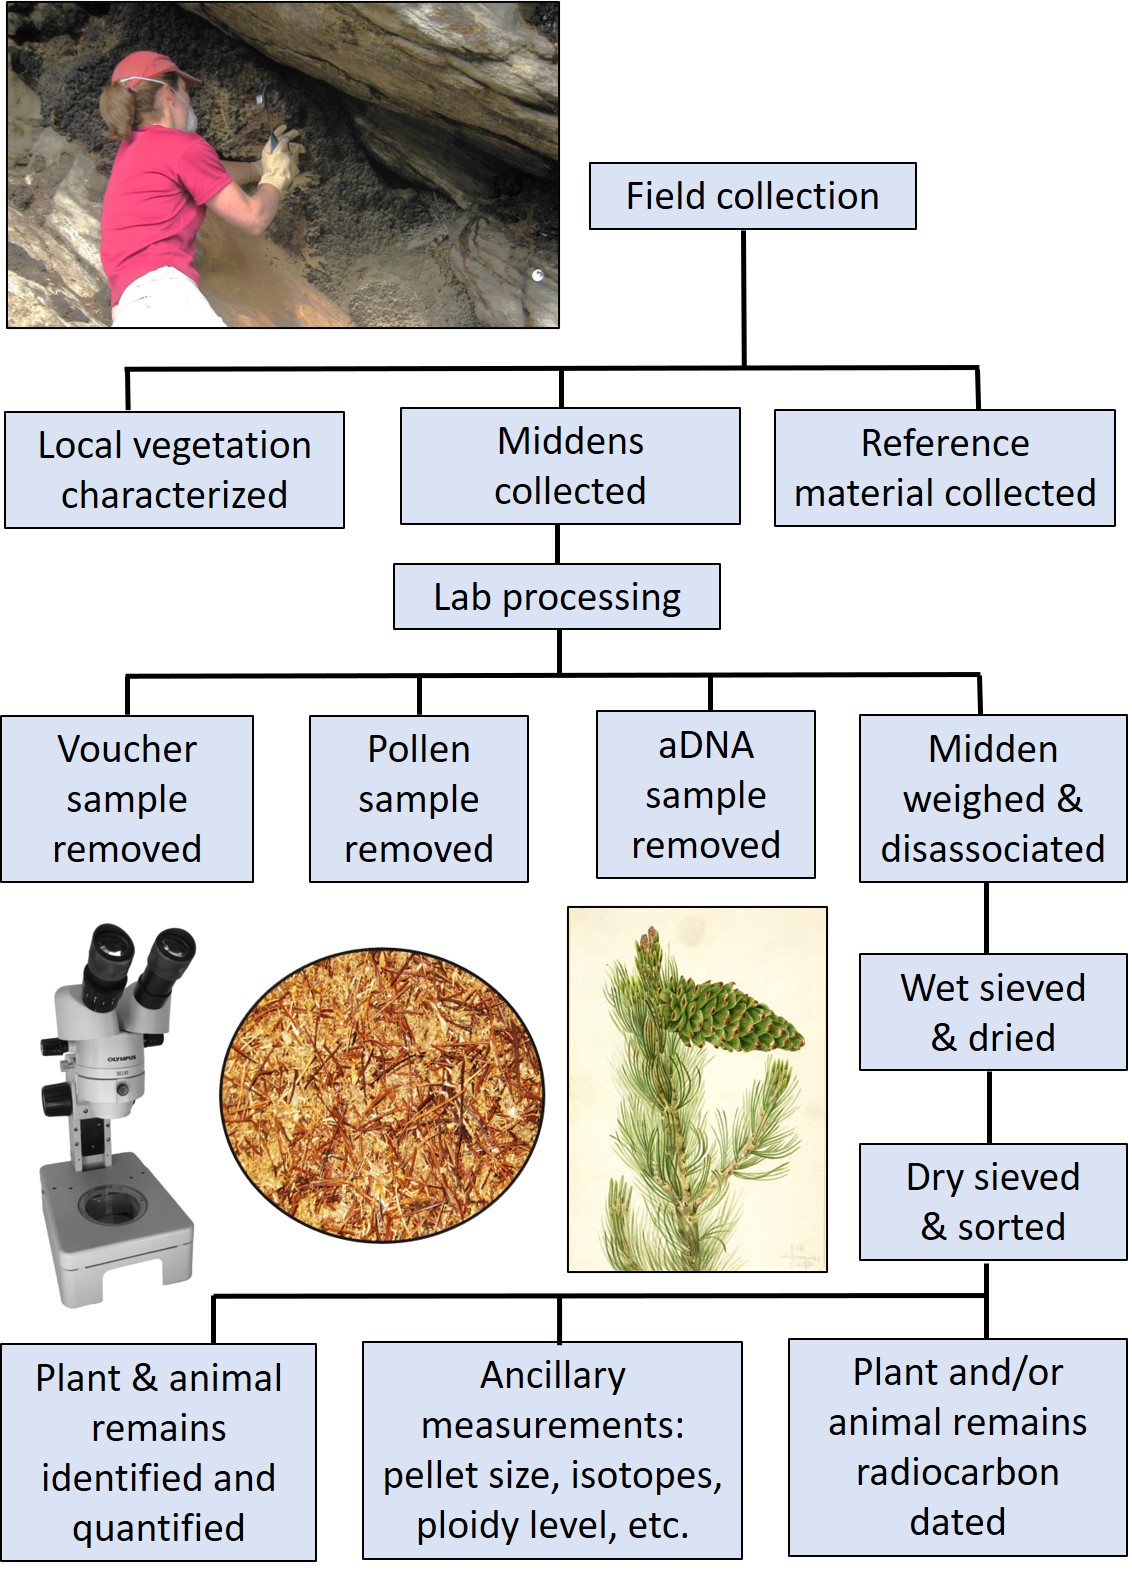 Figure 1. General workflow for field collection and laboratory processing of middens. Top left photo shows a midden being collected at City of Rocks National Reserve, Idaho. Lower photo panel depicts a microscope, a view of midden material from City of Rocks with Pinus flexilis needles (limber pine) at low magnification, and a watercolor depicting a Pinus flexilis branch and cone. Pinus flexilis watercolor by Mary Vaux Walcott, Public domain, via Wikimedia Commons; microscope image by Sarah Greenwood, CC BY-SA 4.0 via Wikimedia Commons. 